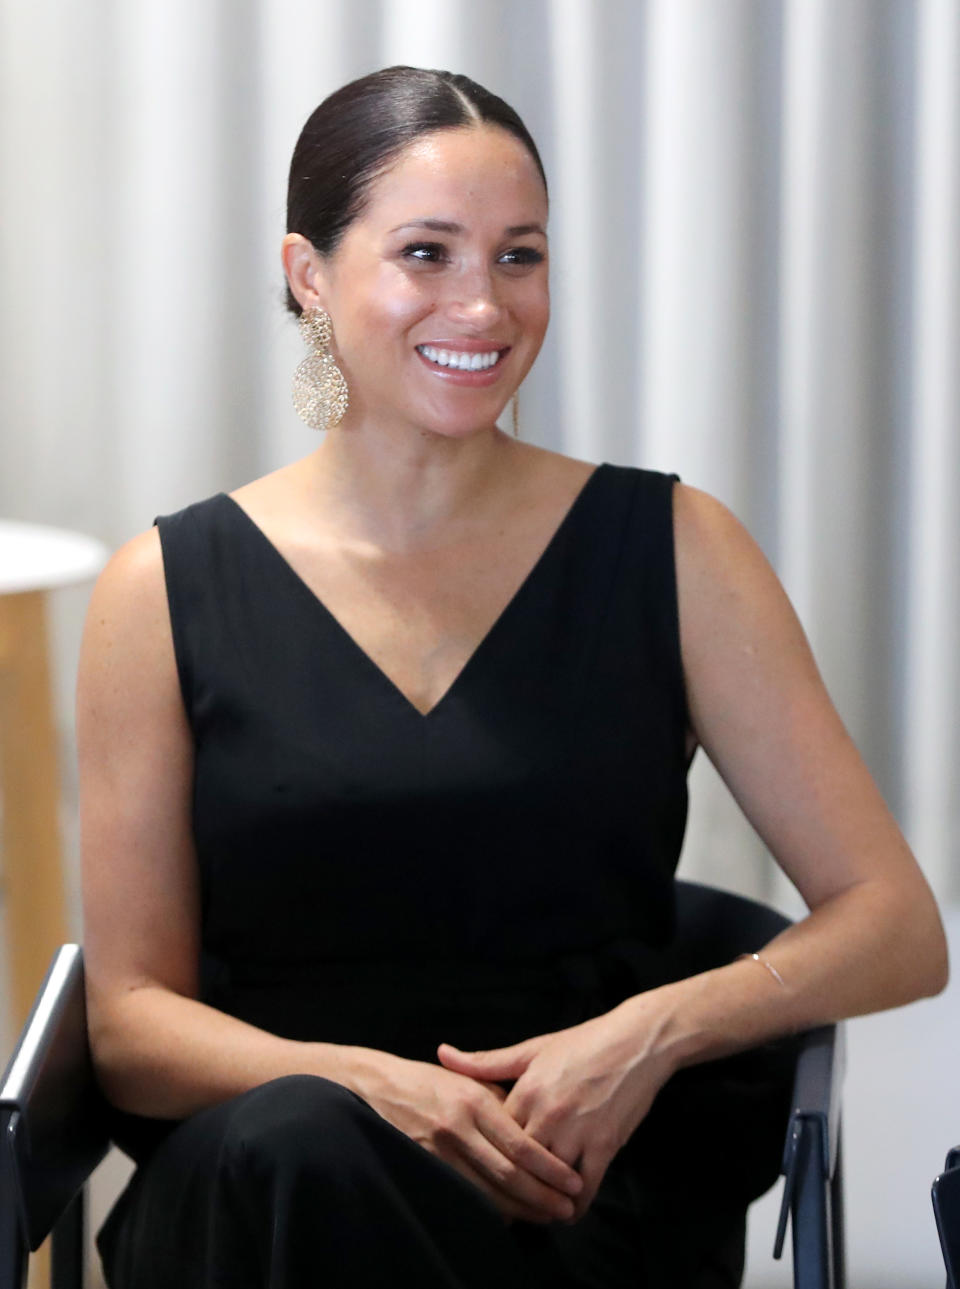 CAPE TOWN, SOUTH AFRICA - SEPTEMBER 25:  Meghan, Duchess of Sussex speaks with 12 inspiring female entrepreneurs as she visits Woodstock Exchange, a women founders/social entrepreneurs event during her royal tour of South Africa with Prince Harry, Duke of Sussex on September 25, 2019 in Cape Town, South Africa. Woodstock Exchange, the UK-SA Tech Hub focuses on skills development and access to markets by assisting entrepreneurs, particularly women, to acquire skills, resources and support. (Photo by Chris Jackson - Pool/Getty Images)